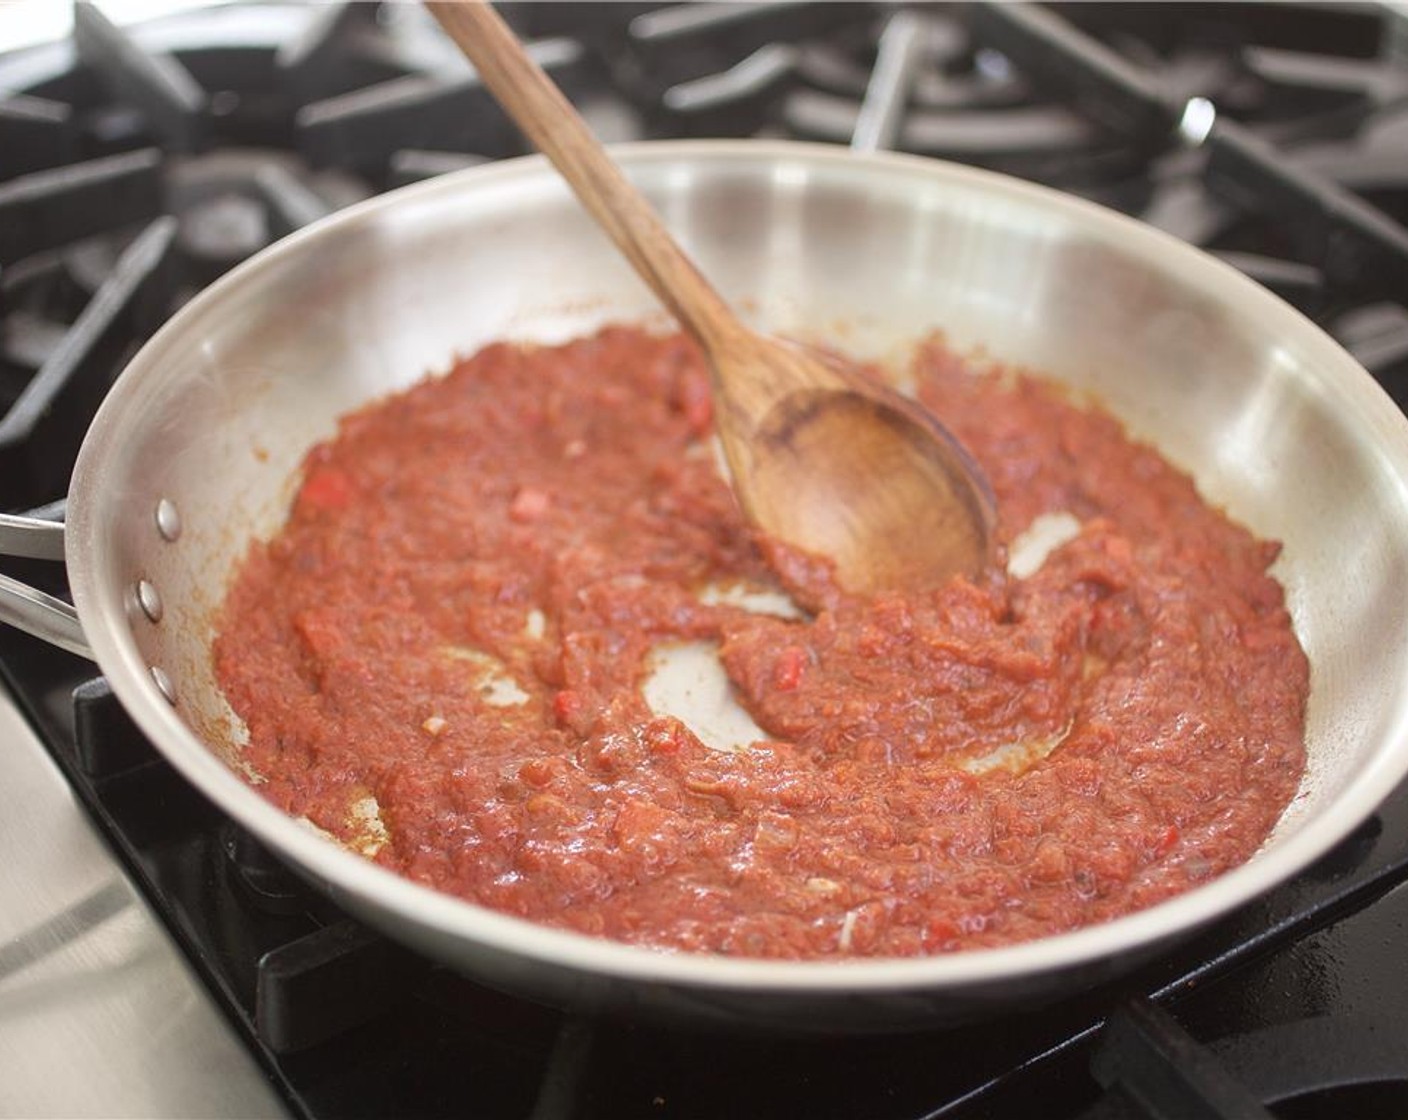 step 9 Add the Crushed Tomatoes (1 can), Dijon Mustard (1 pckg), Dried Oregano (1/2 tsp), Cayenne Pepper (1/4 tsp), Salt (1/4 tsp), and Ground Black Pepper (1/4 tsp). Bring to a simmer.